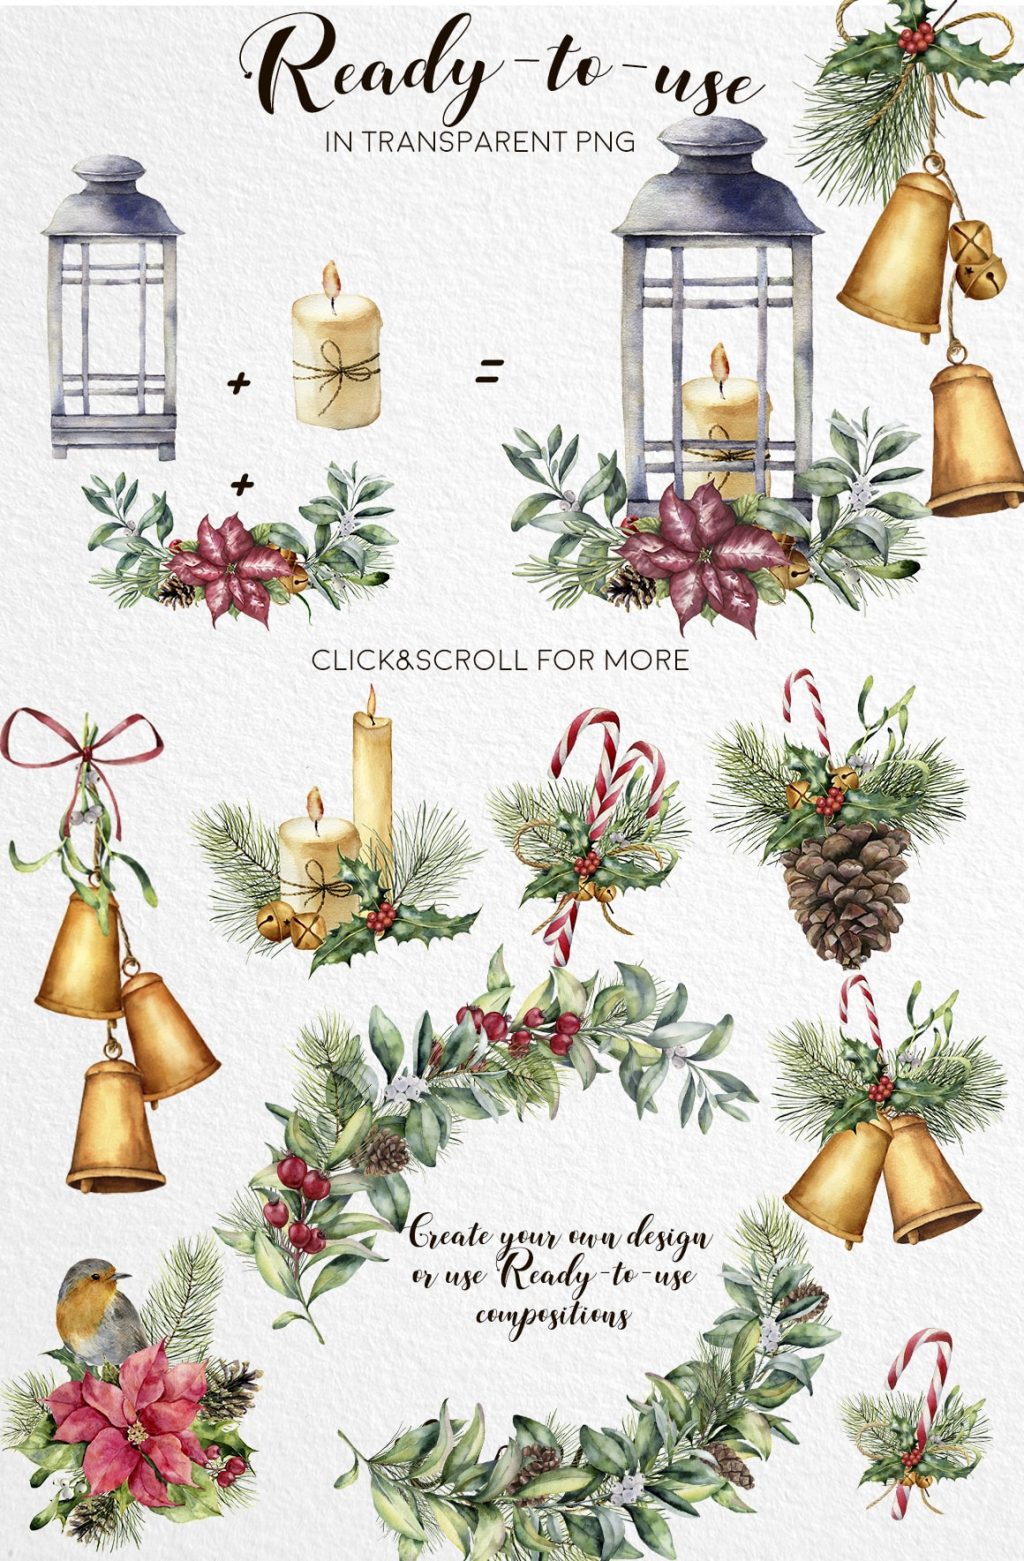 These are lovely watercolor Christmas attribures.